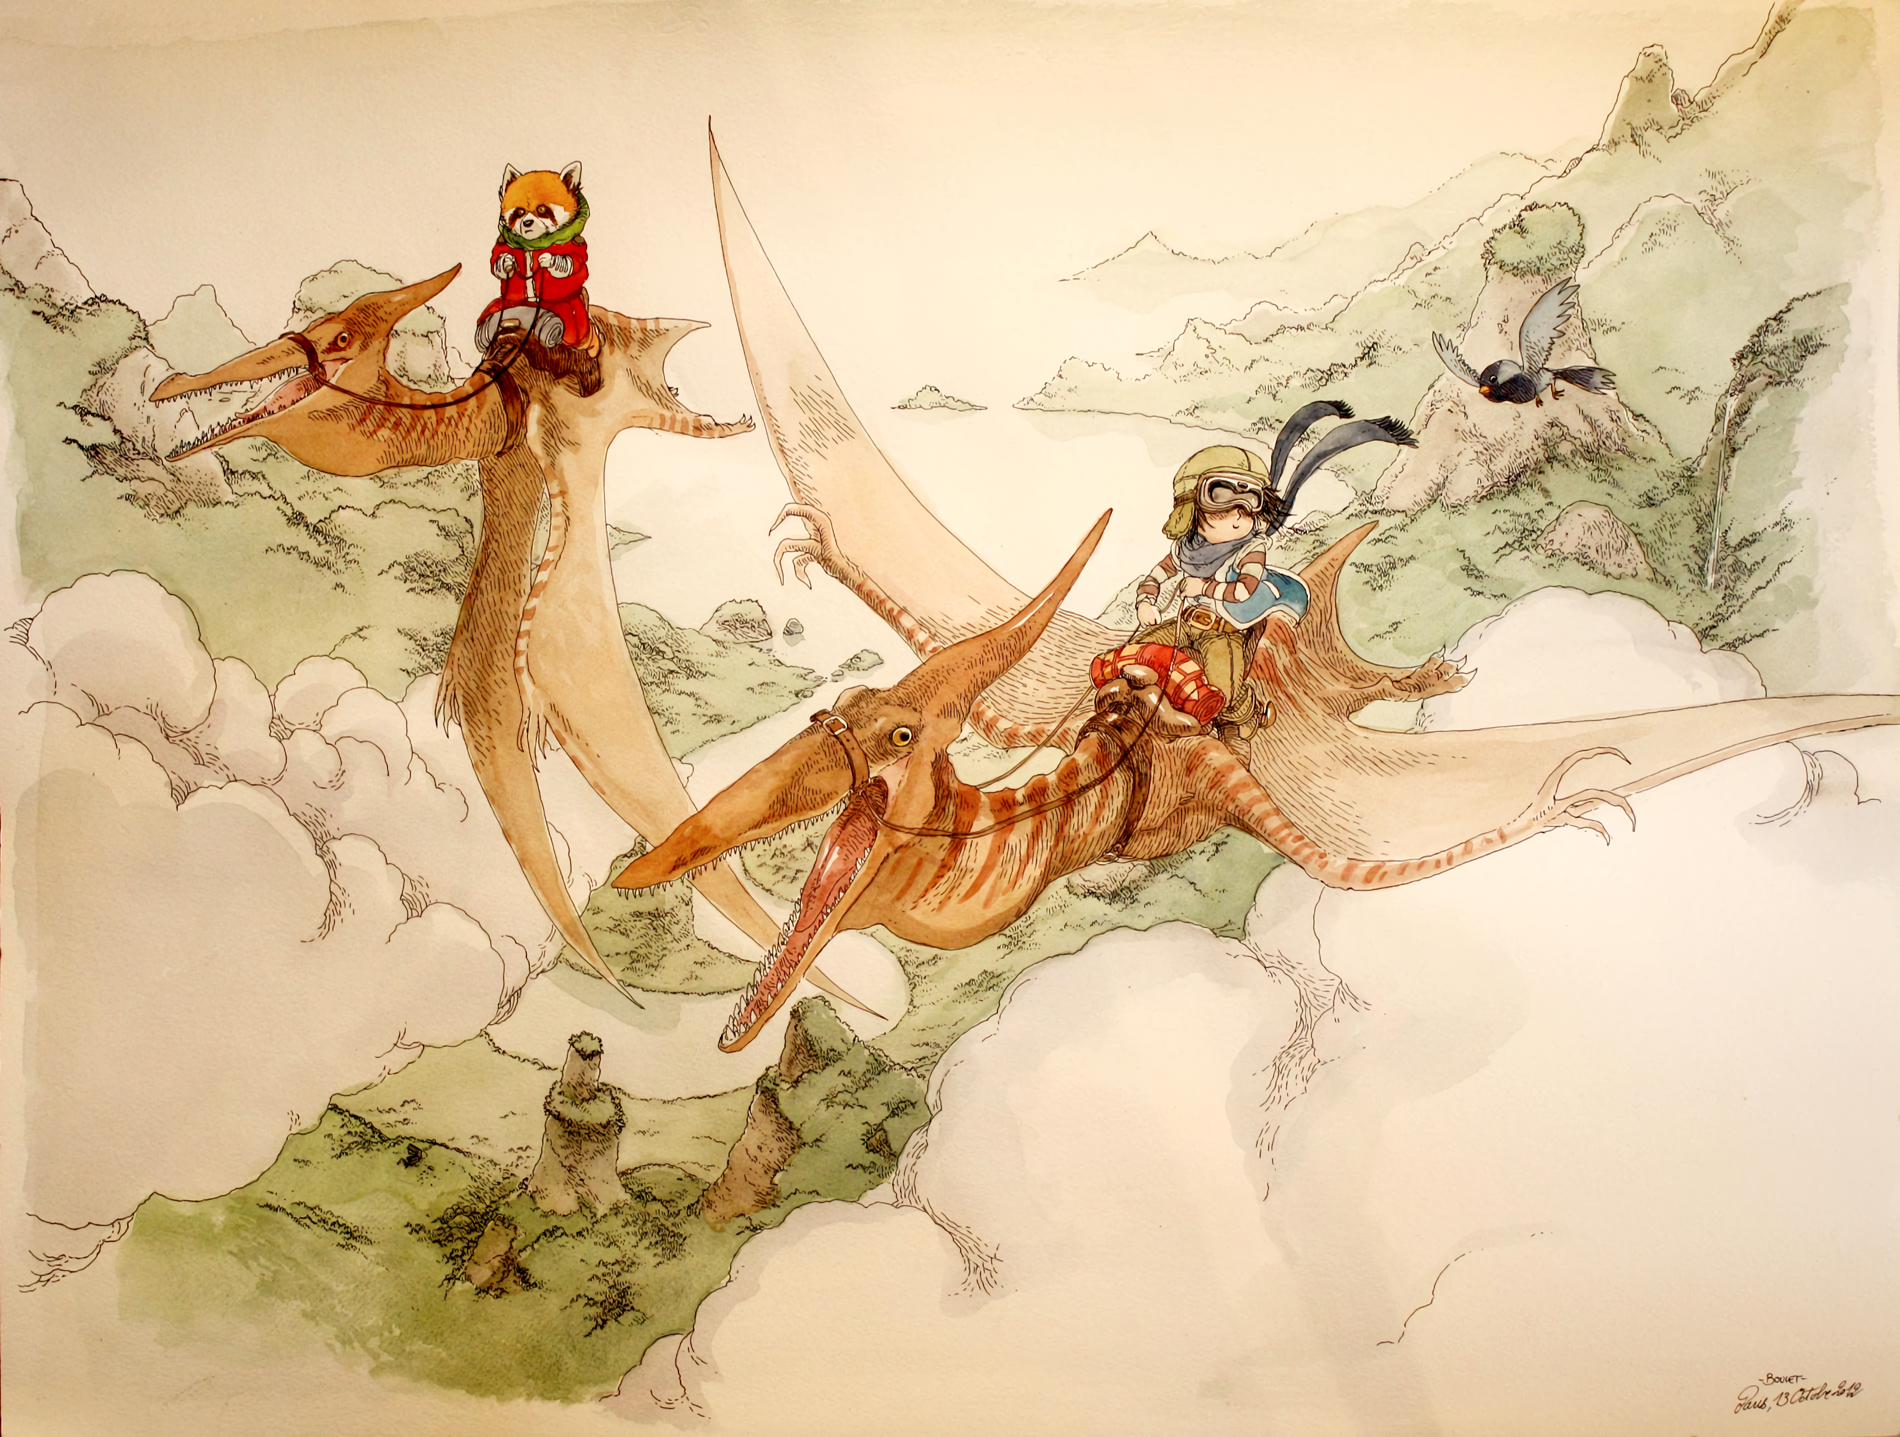 A child and a brown anthropomorphized raccoon, each riding on a pterodactyl, over a Ghibli-esque cloudy foresty landscape